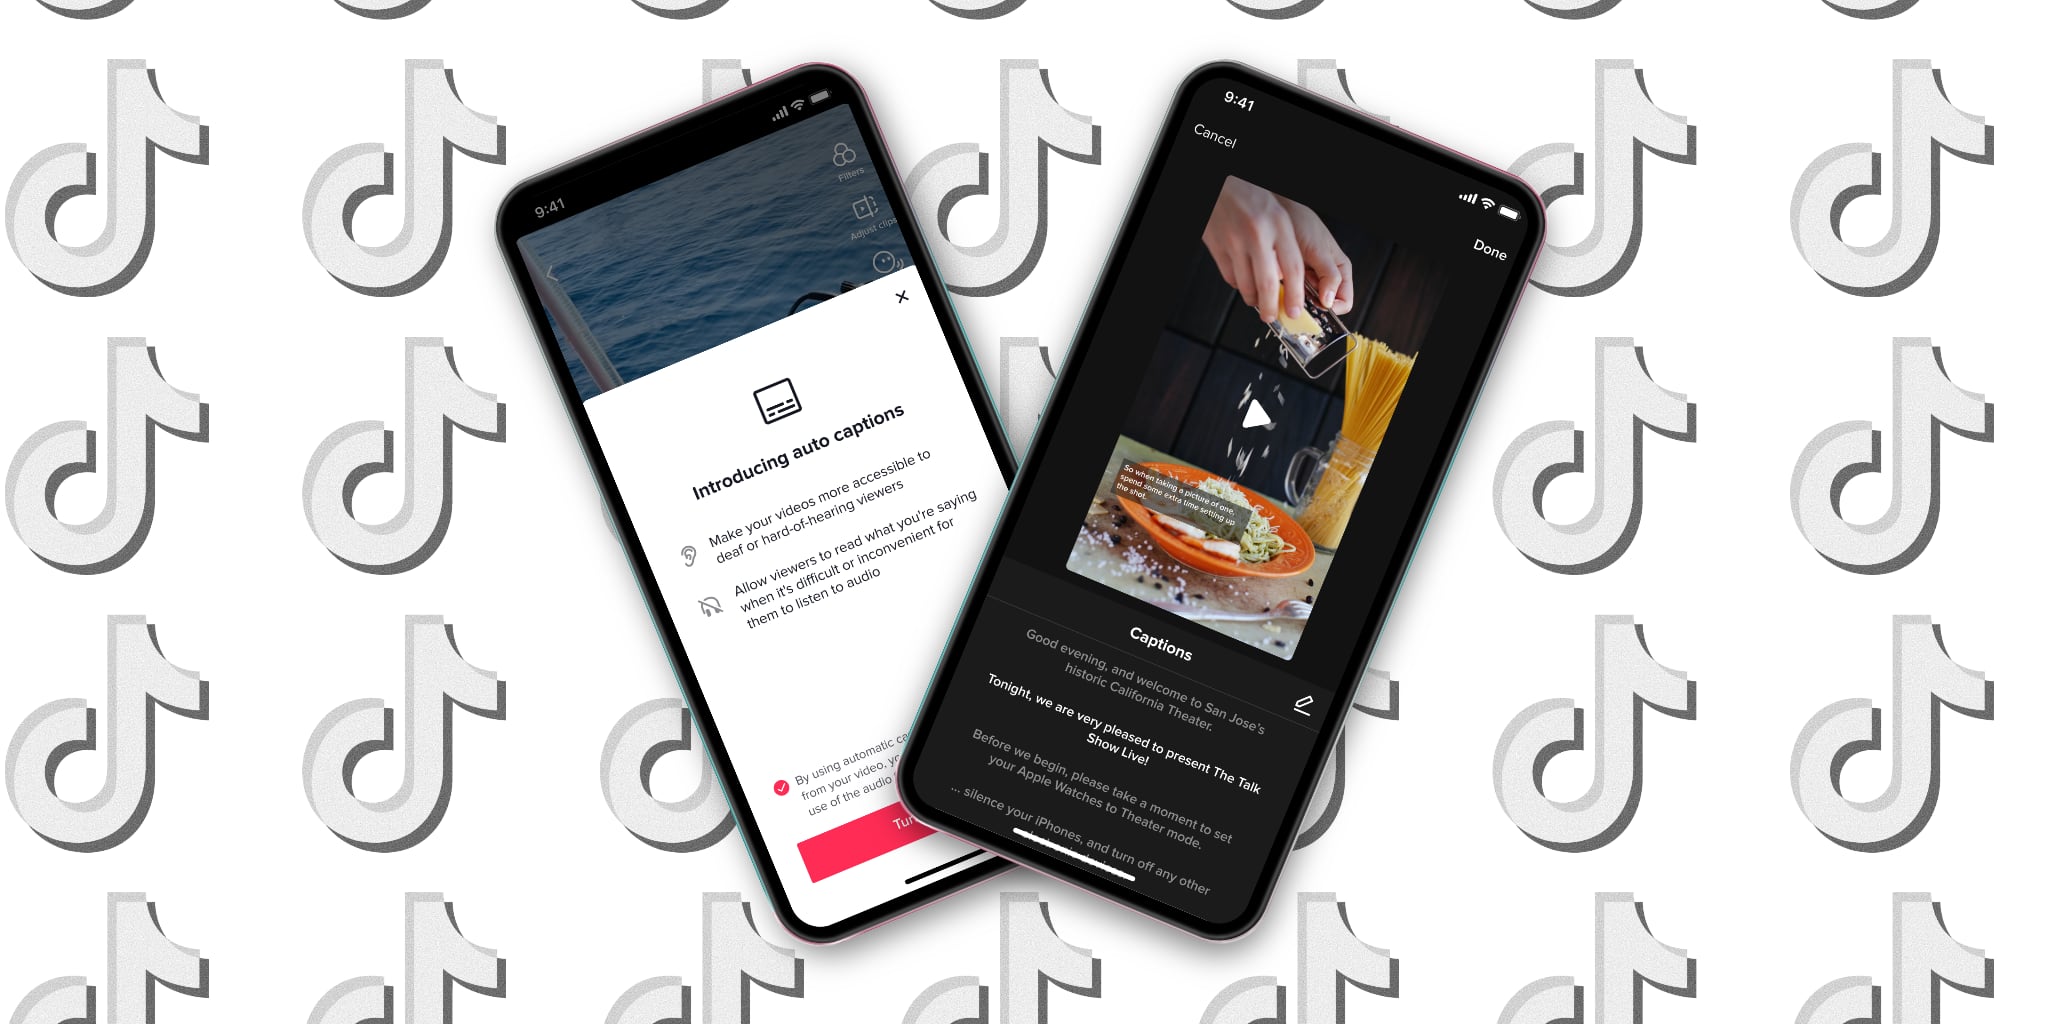 Featured image showing two iPhones showing TikTok automatic captioning in action